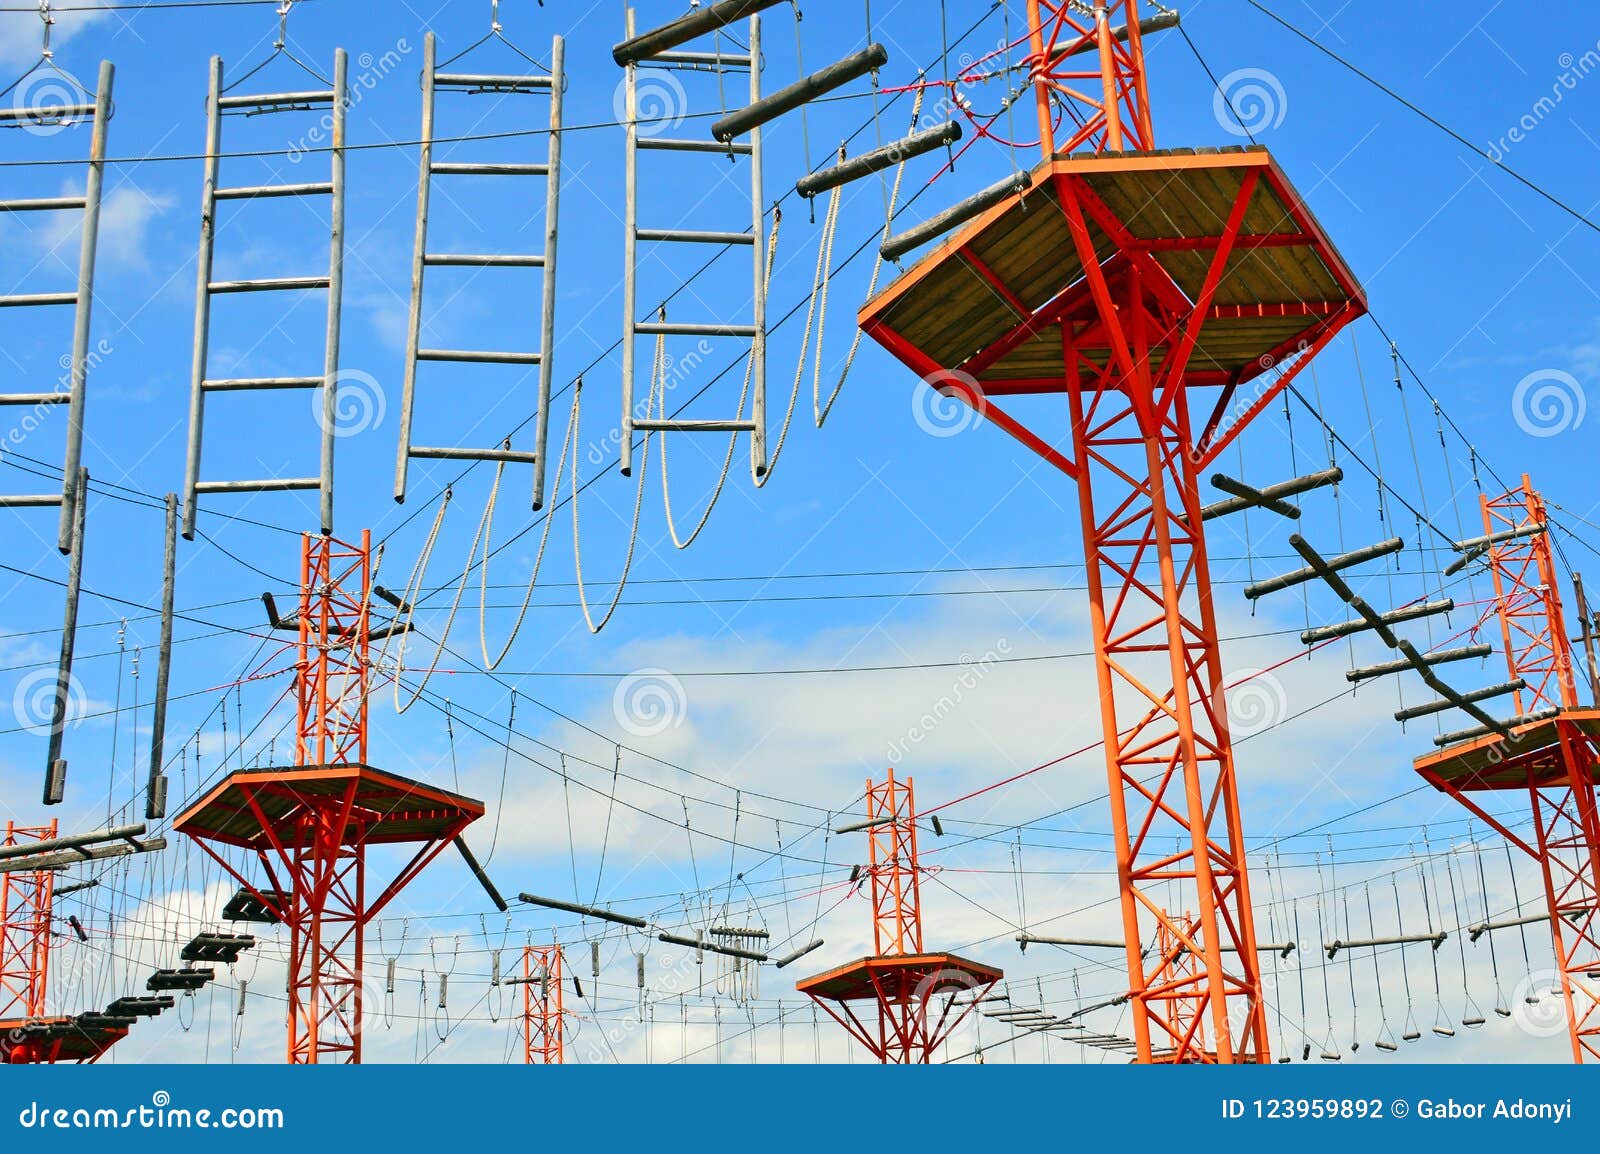 Adult Adventure Park Ropeway Stock Photo - Image of family